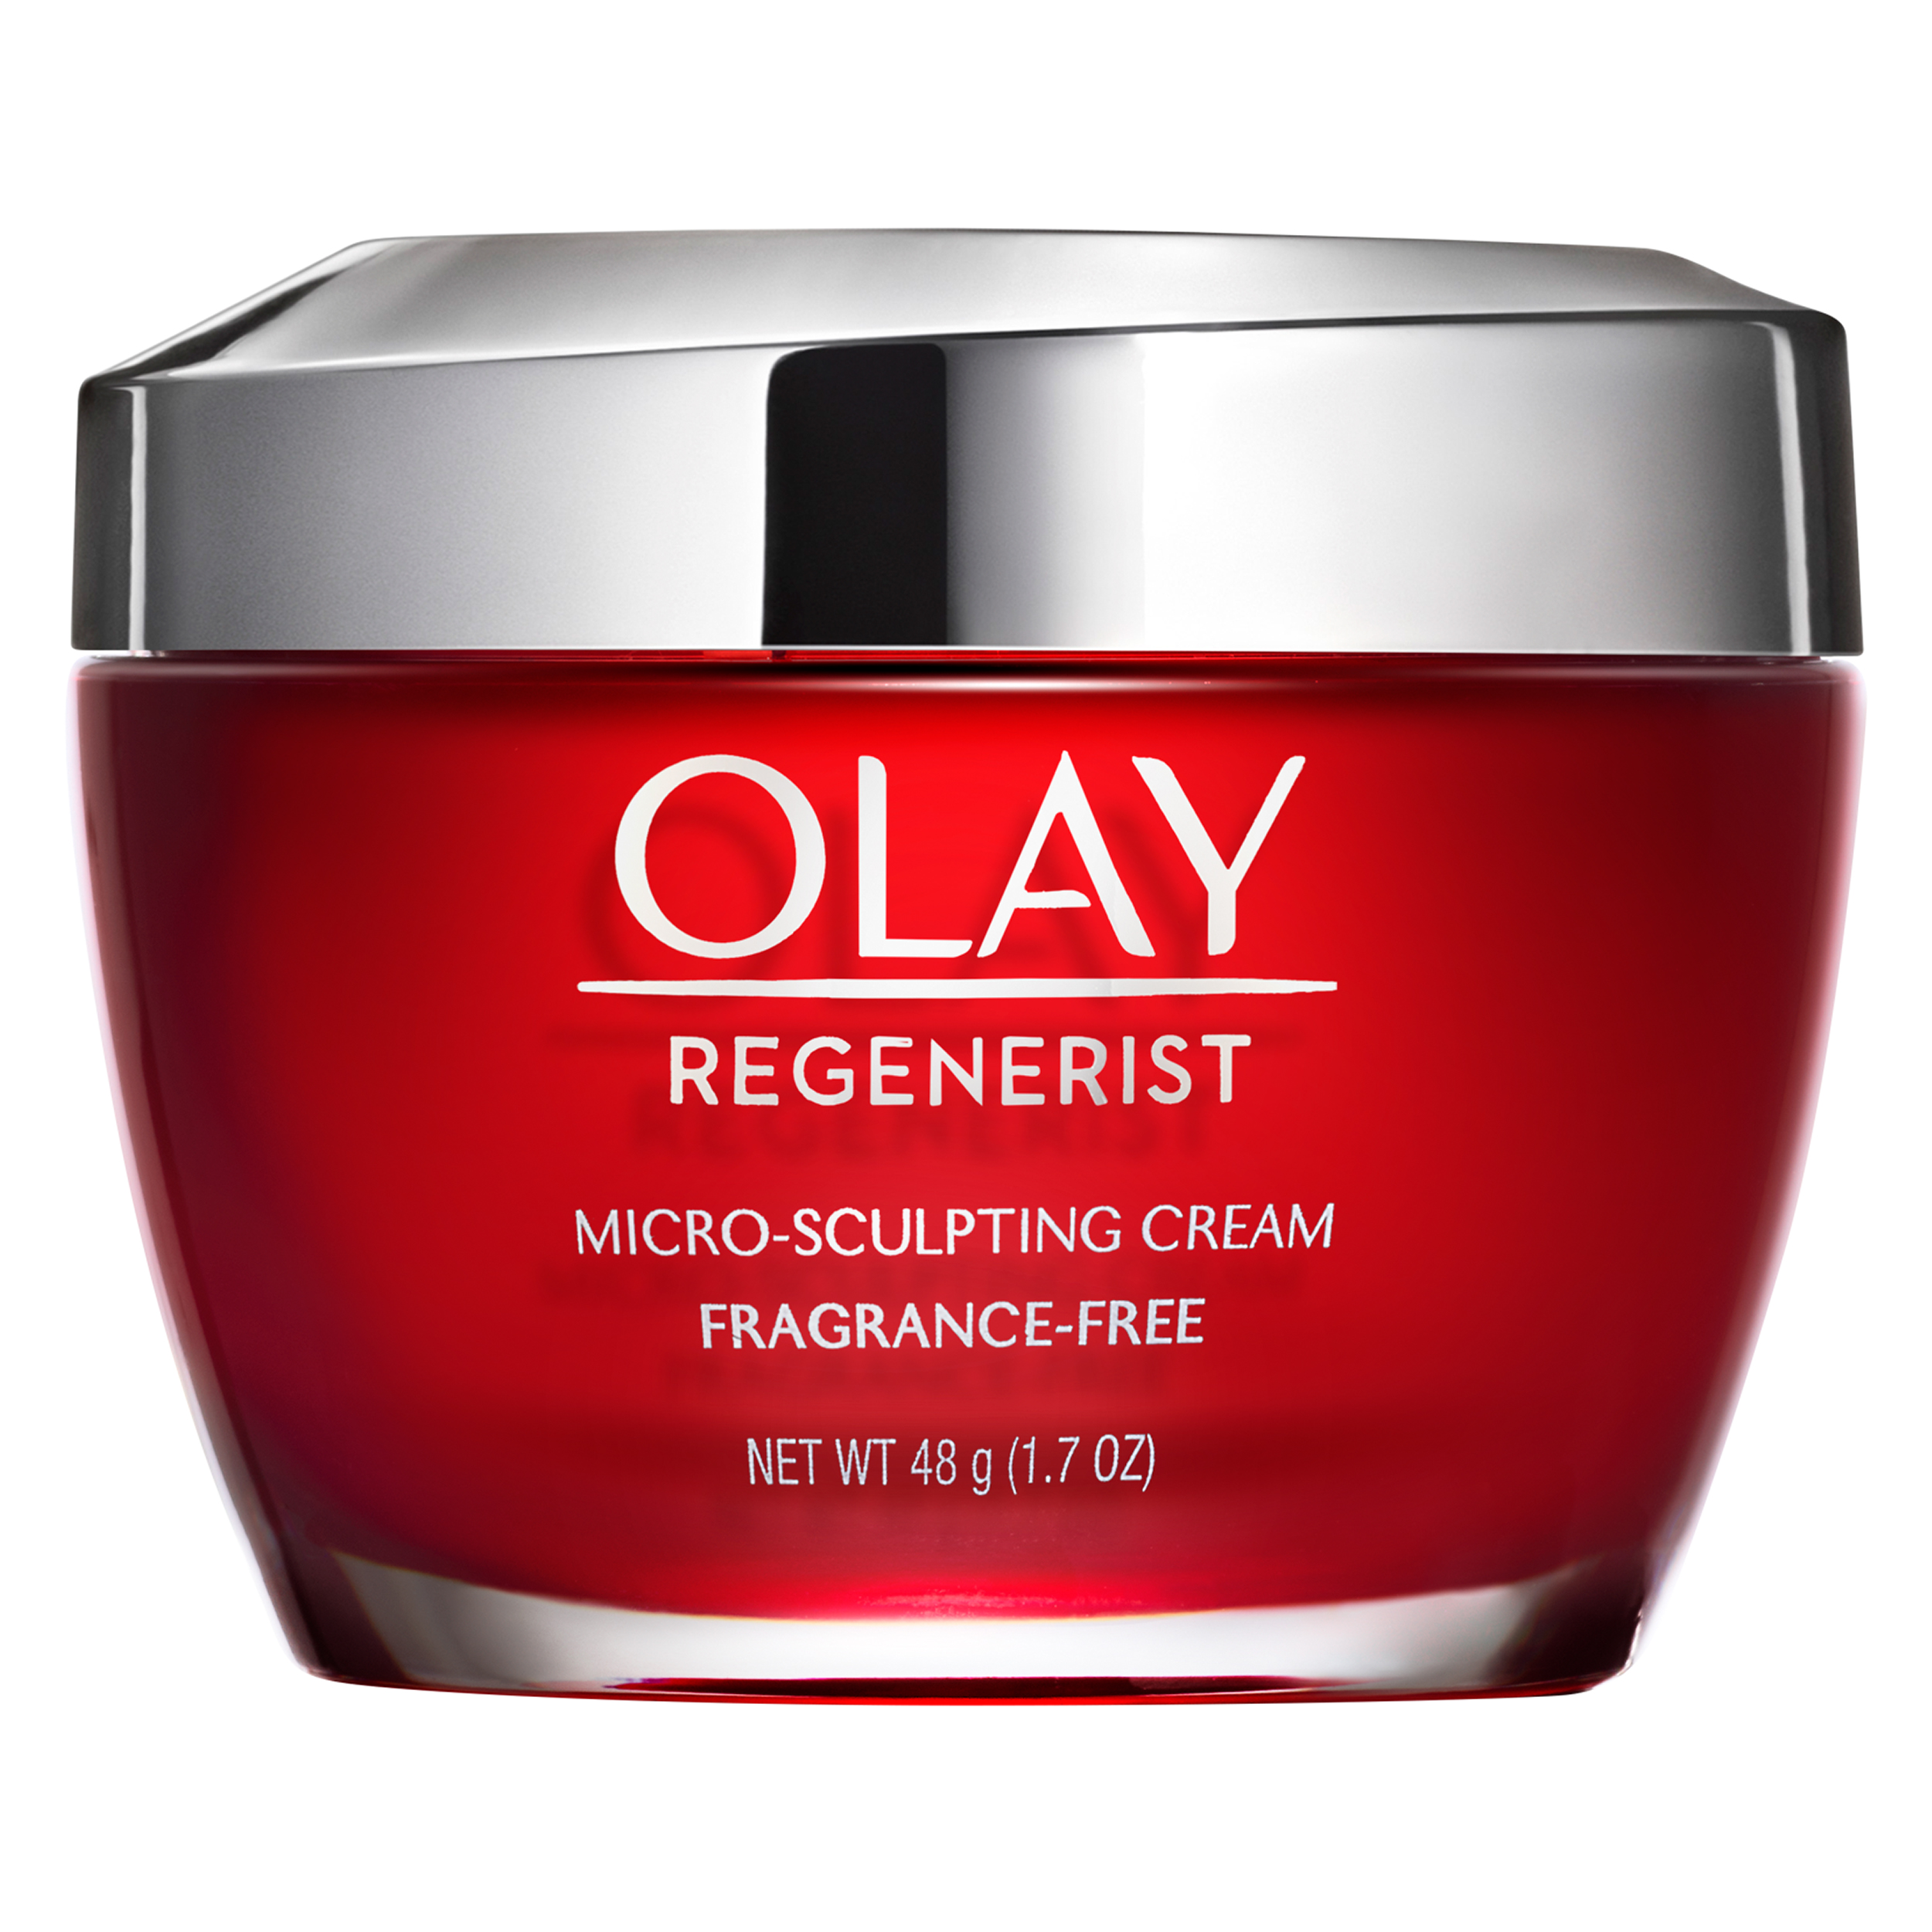 olay-regenerist-fabwoman-news-style-living-content-for-the